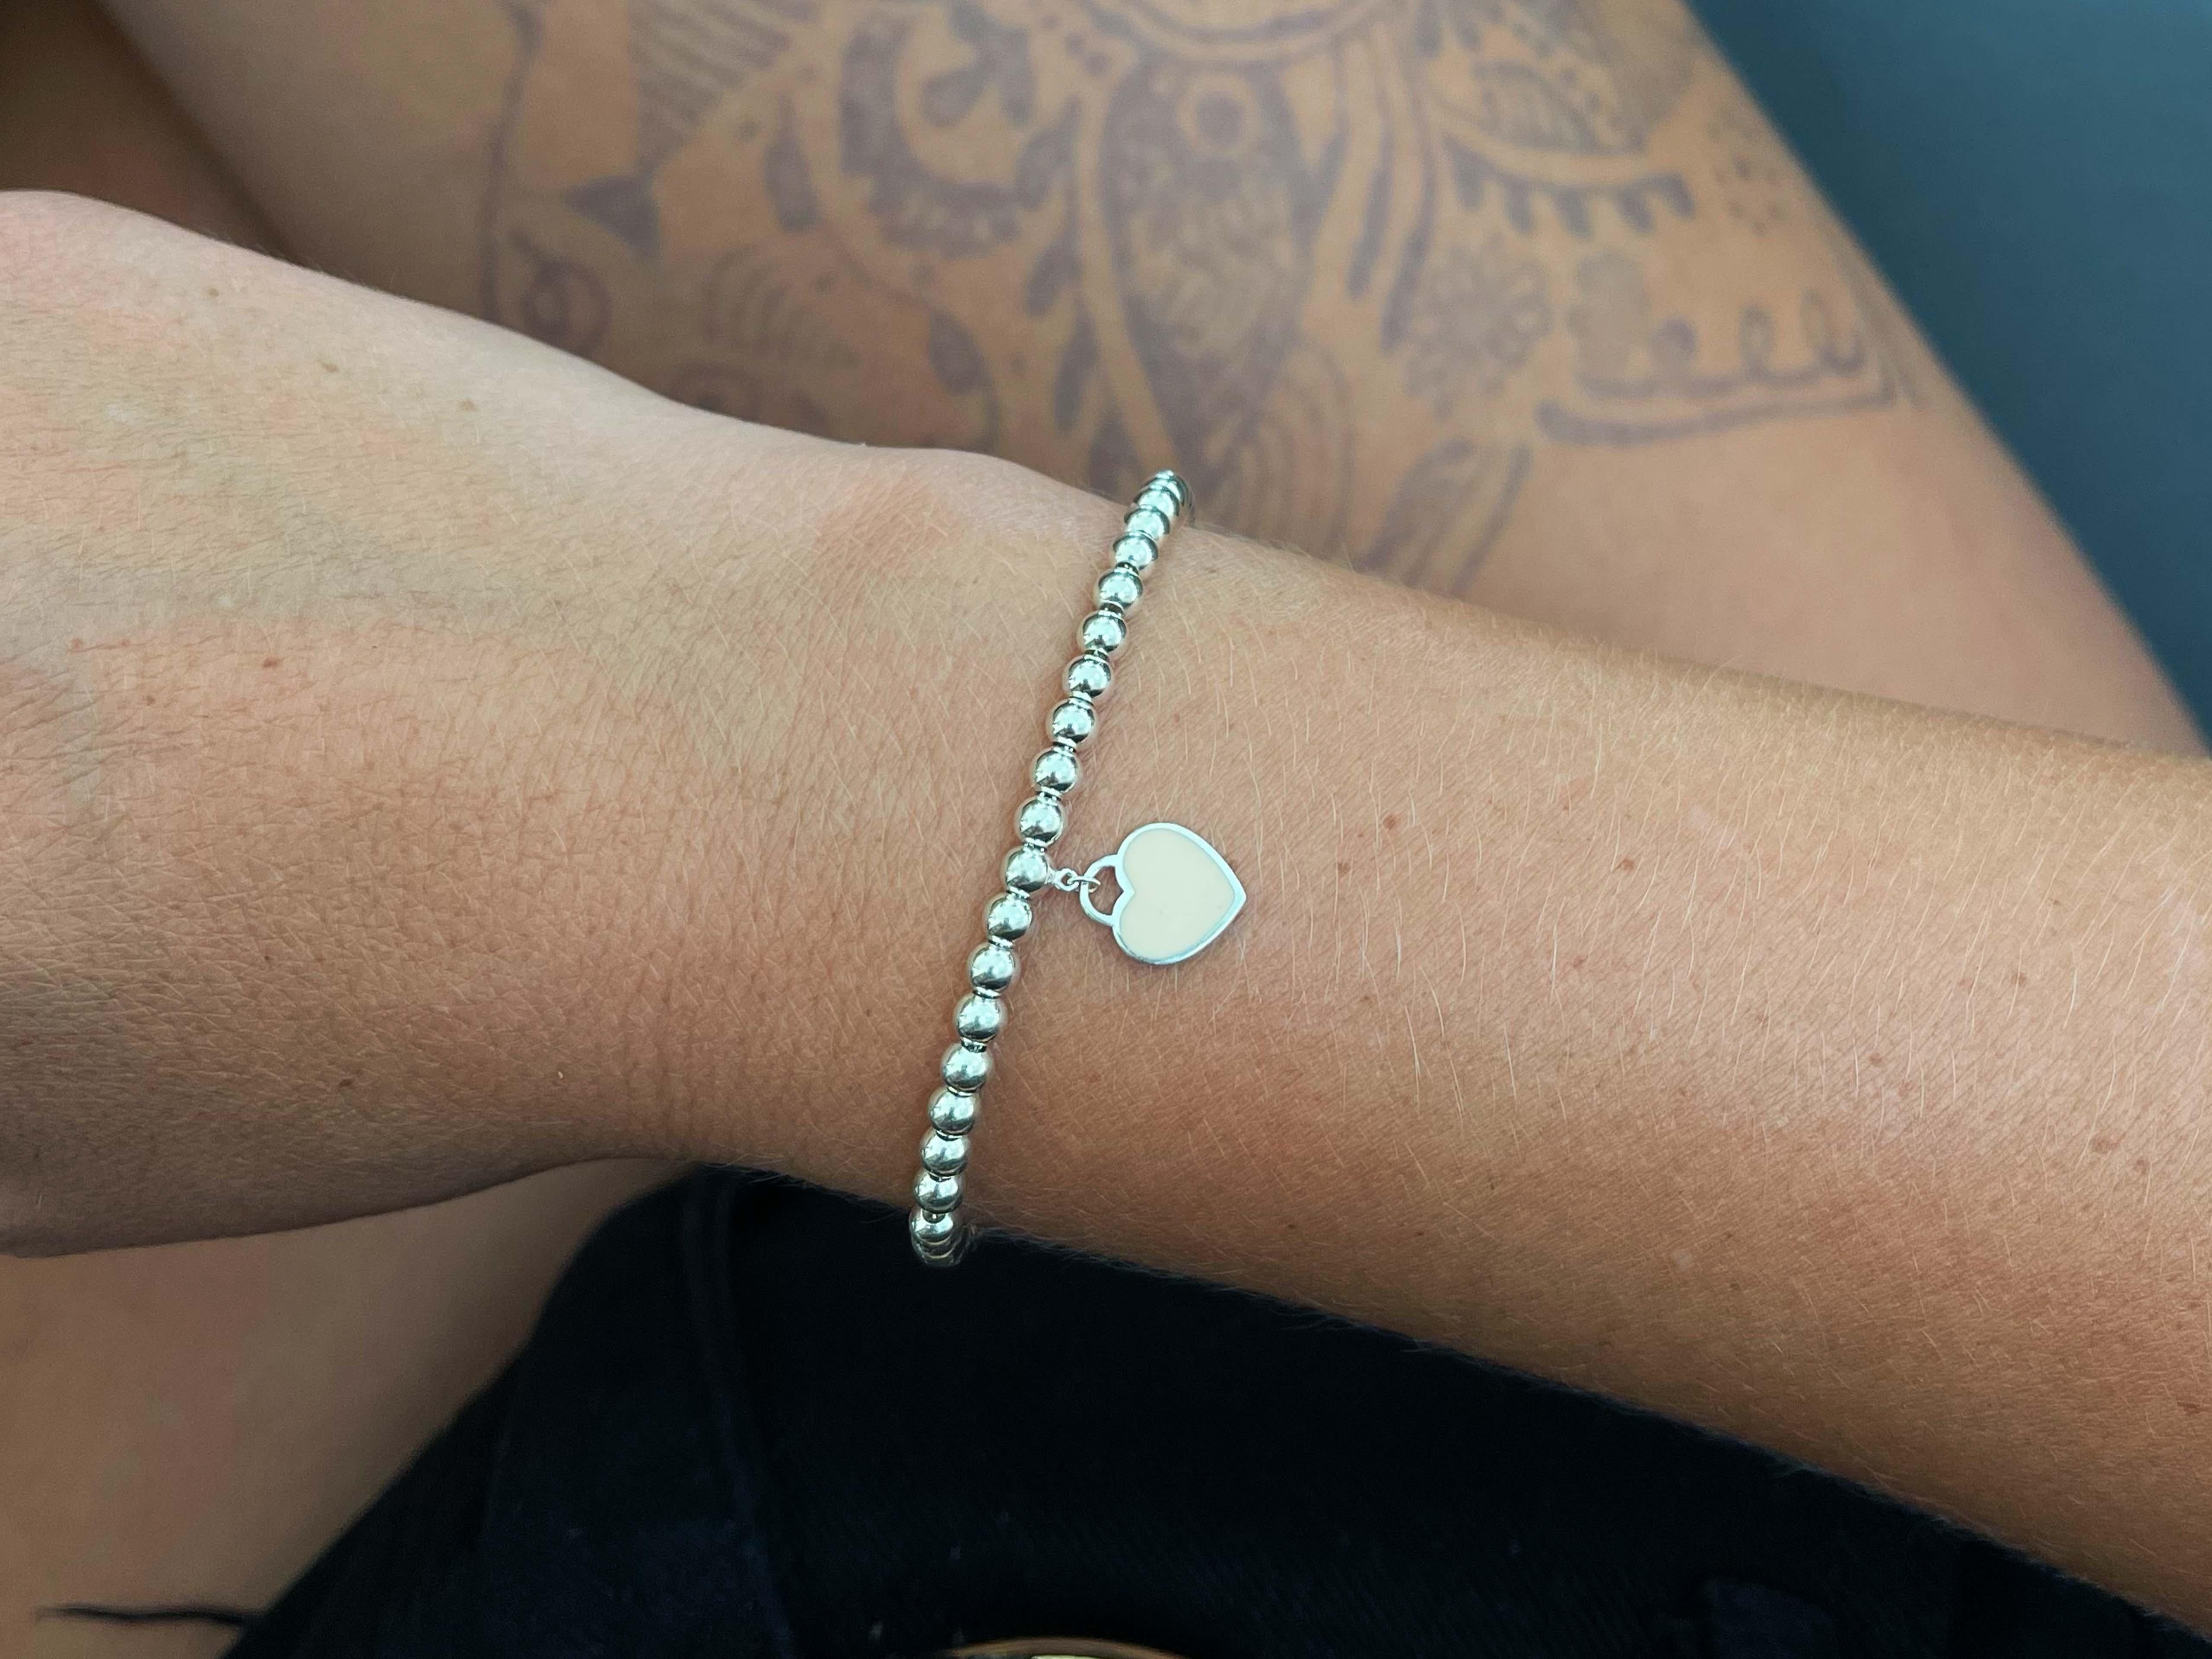 Inspired by the iconic key ring first introduced in 1969, the Return to Tiffany collection is a classic reinvented. This elegant bead bracelet features an engraved tag with a pink enamel finish, evoking a subtle femininity.
​
​Item